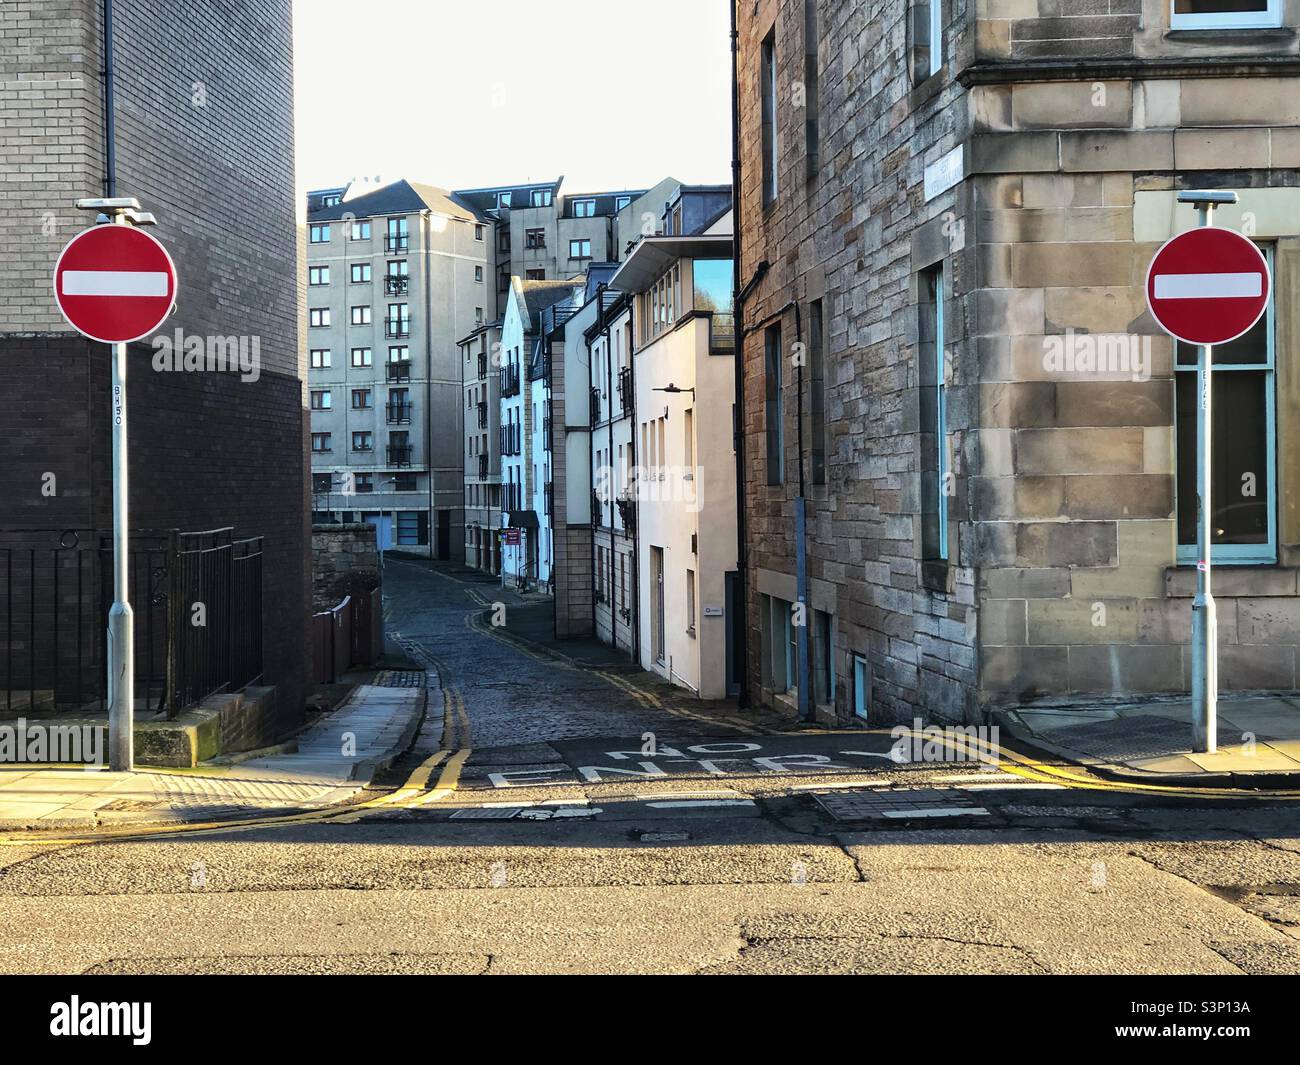 Two No Entry signs on street Stock Photo